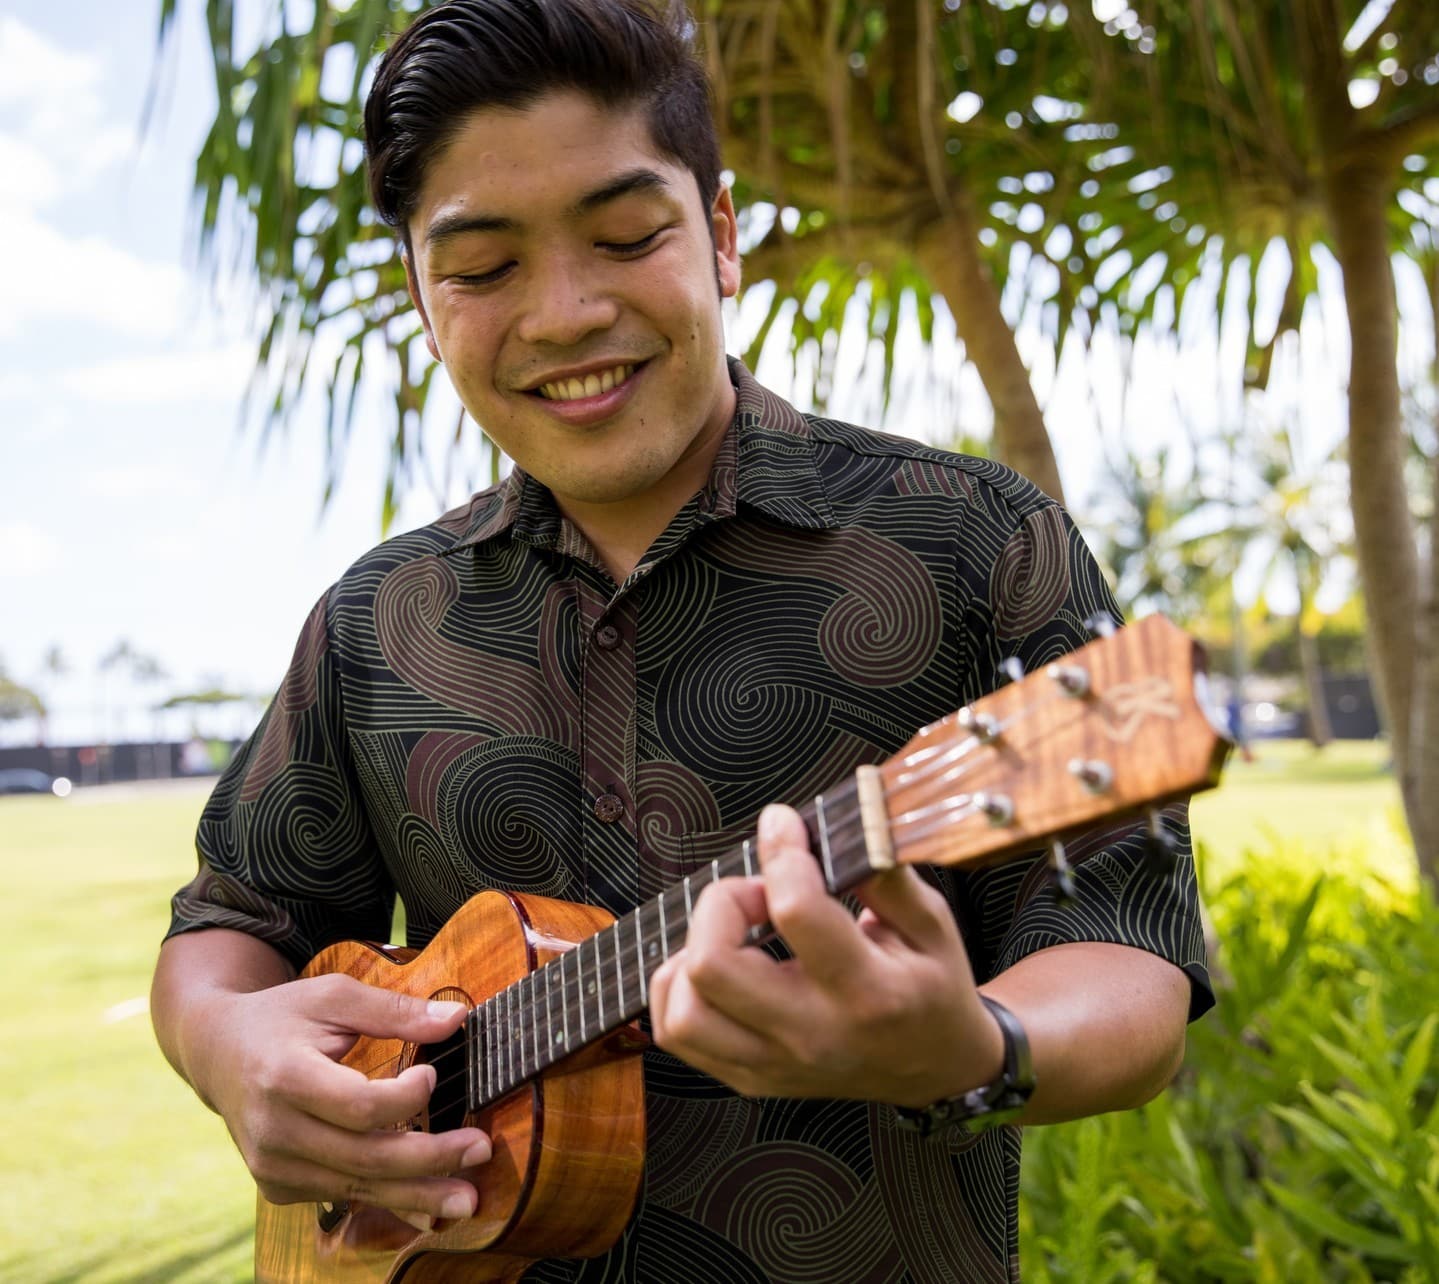 Don’t miss the last Aloha Friday Holiday Music Series pop-up of the year! Listen to @micahganiron on Friday, December 30 from 12pm - 1pm at the South Shore Market Courtyard.